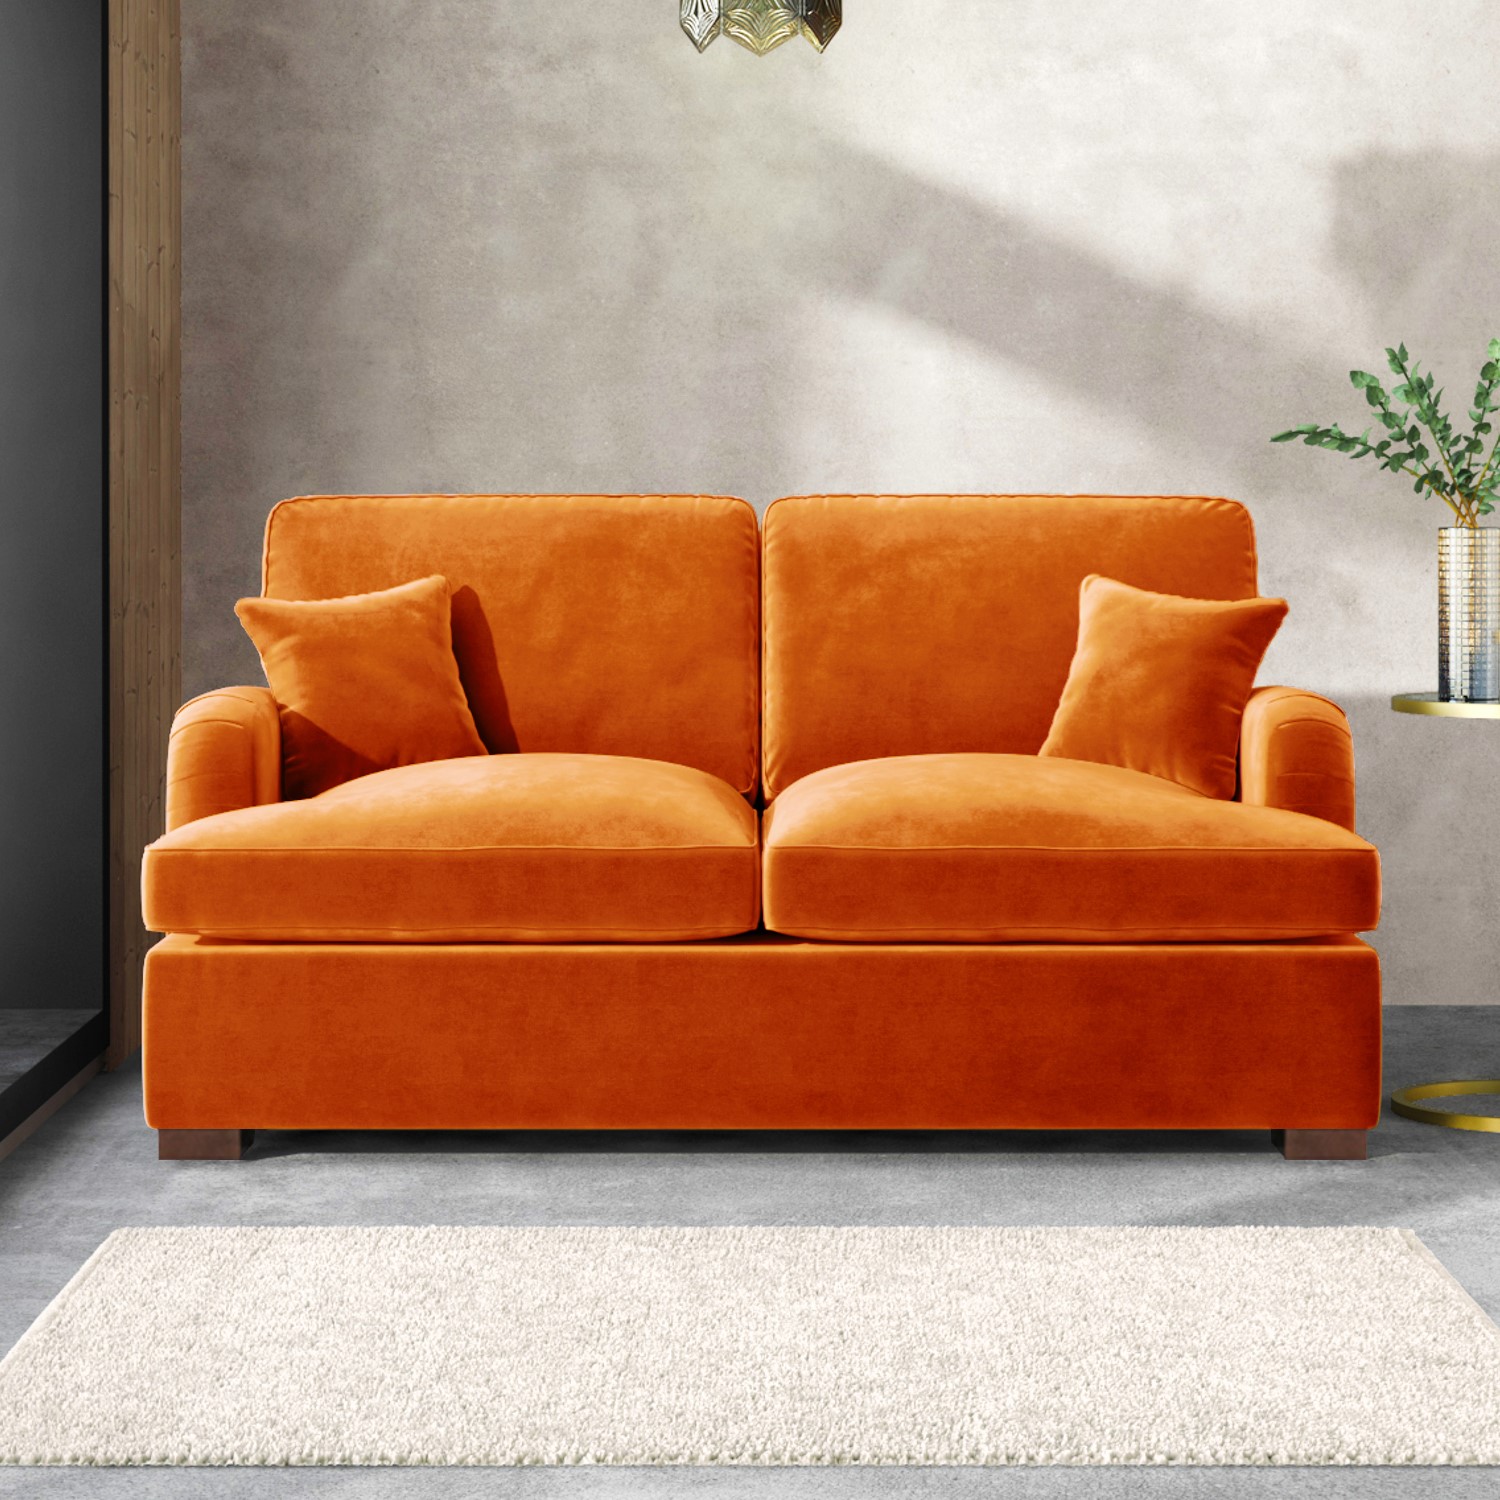 Read more about Orange velvet pull out sofa bed seats 2 payton